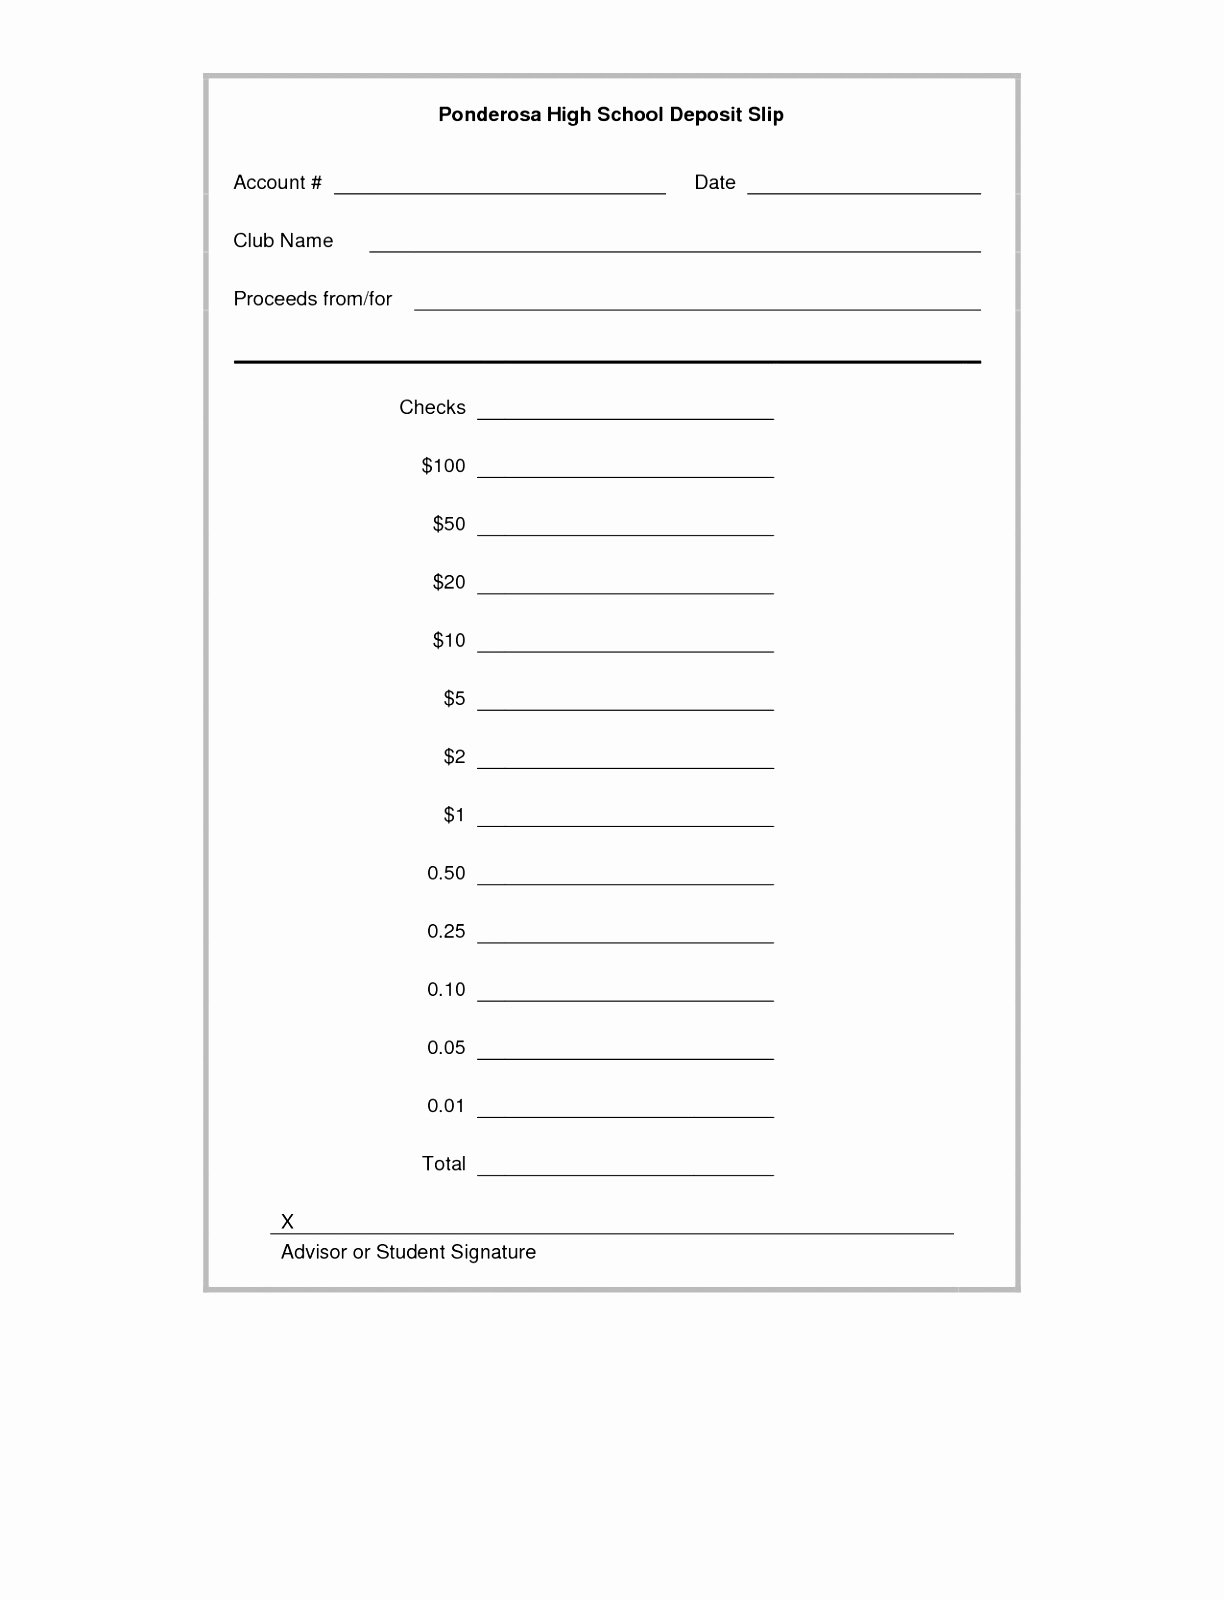 Bank Change order form Awesome 7 Bank Change order form Template Taeew